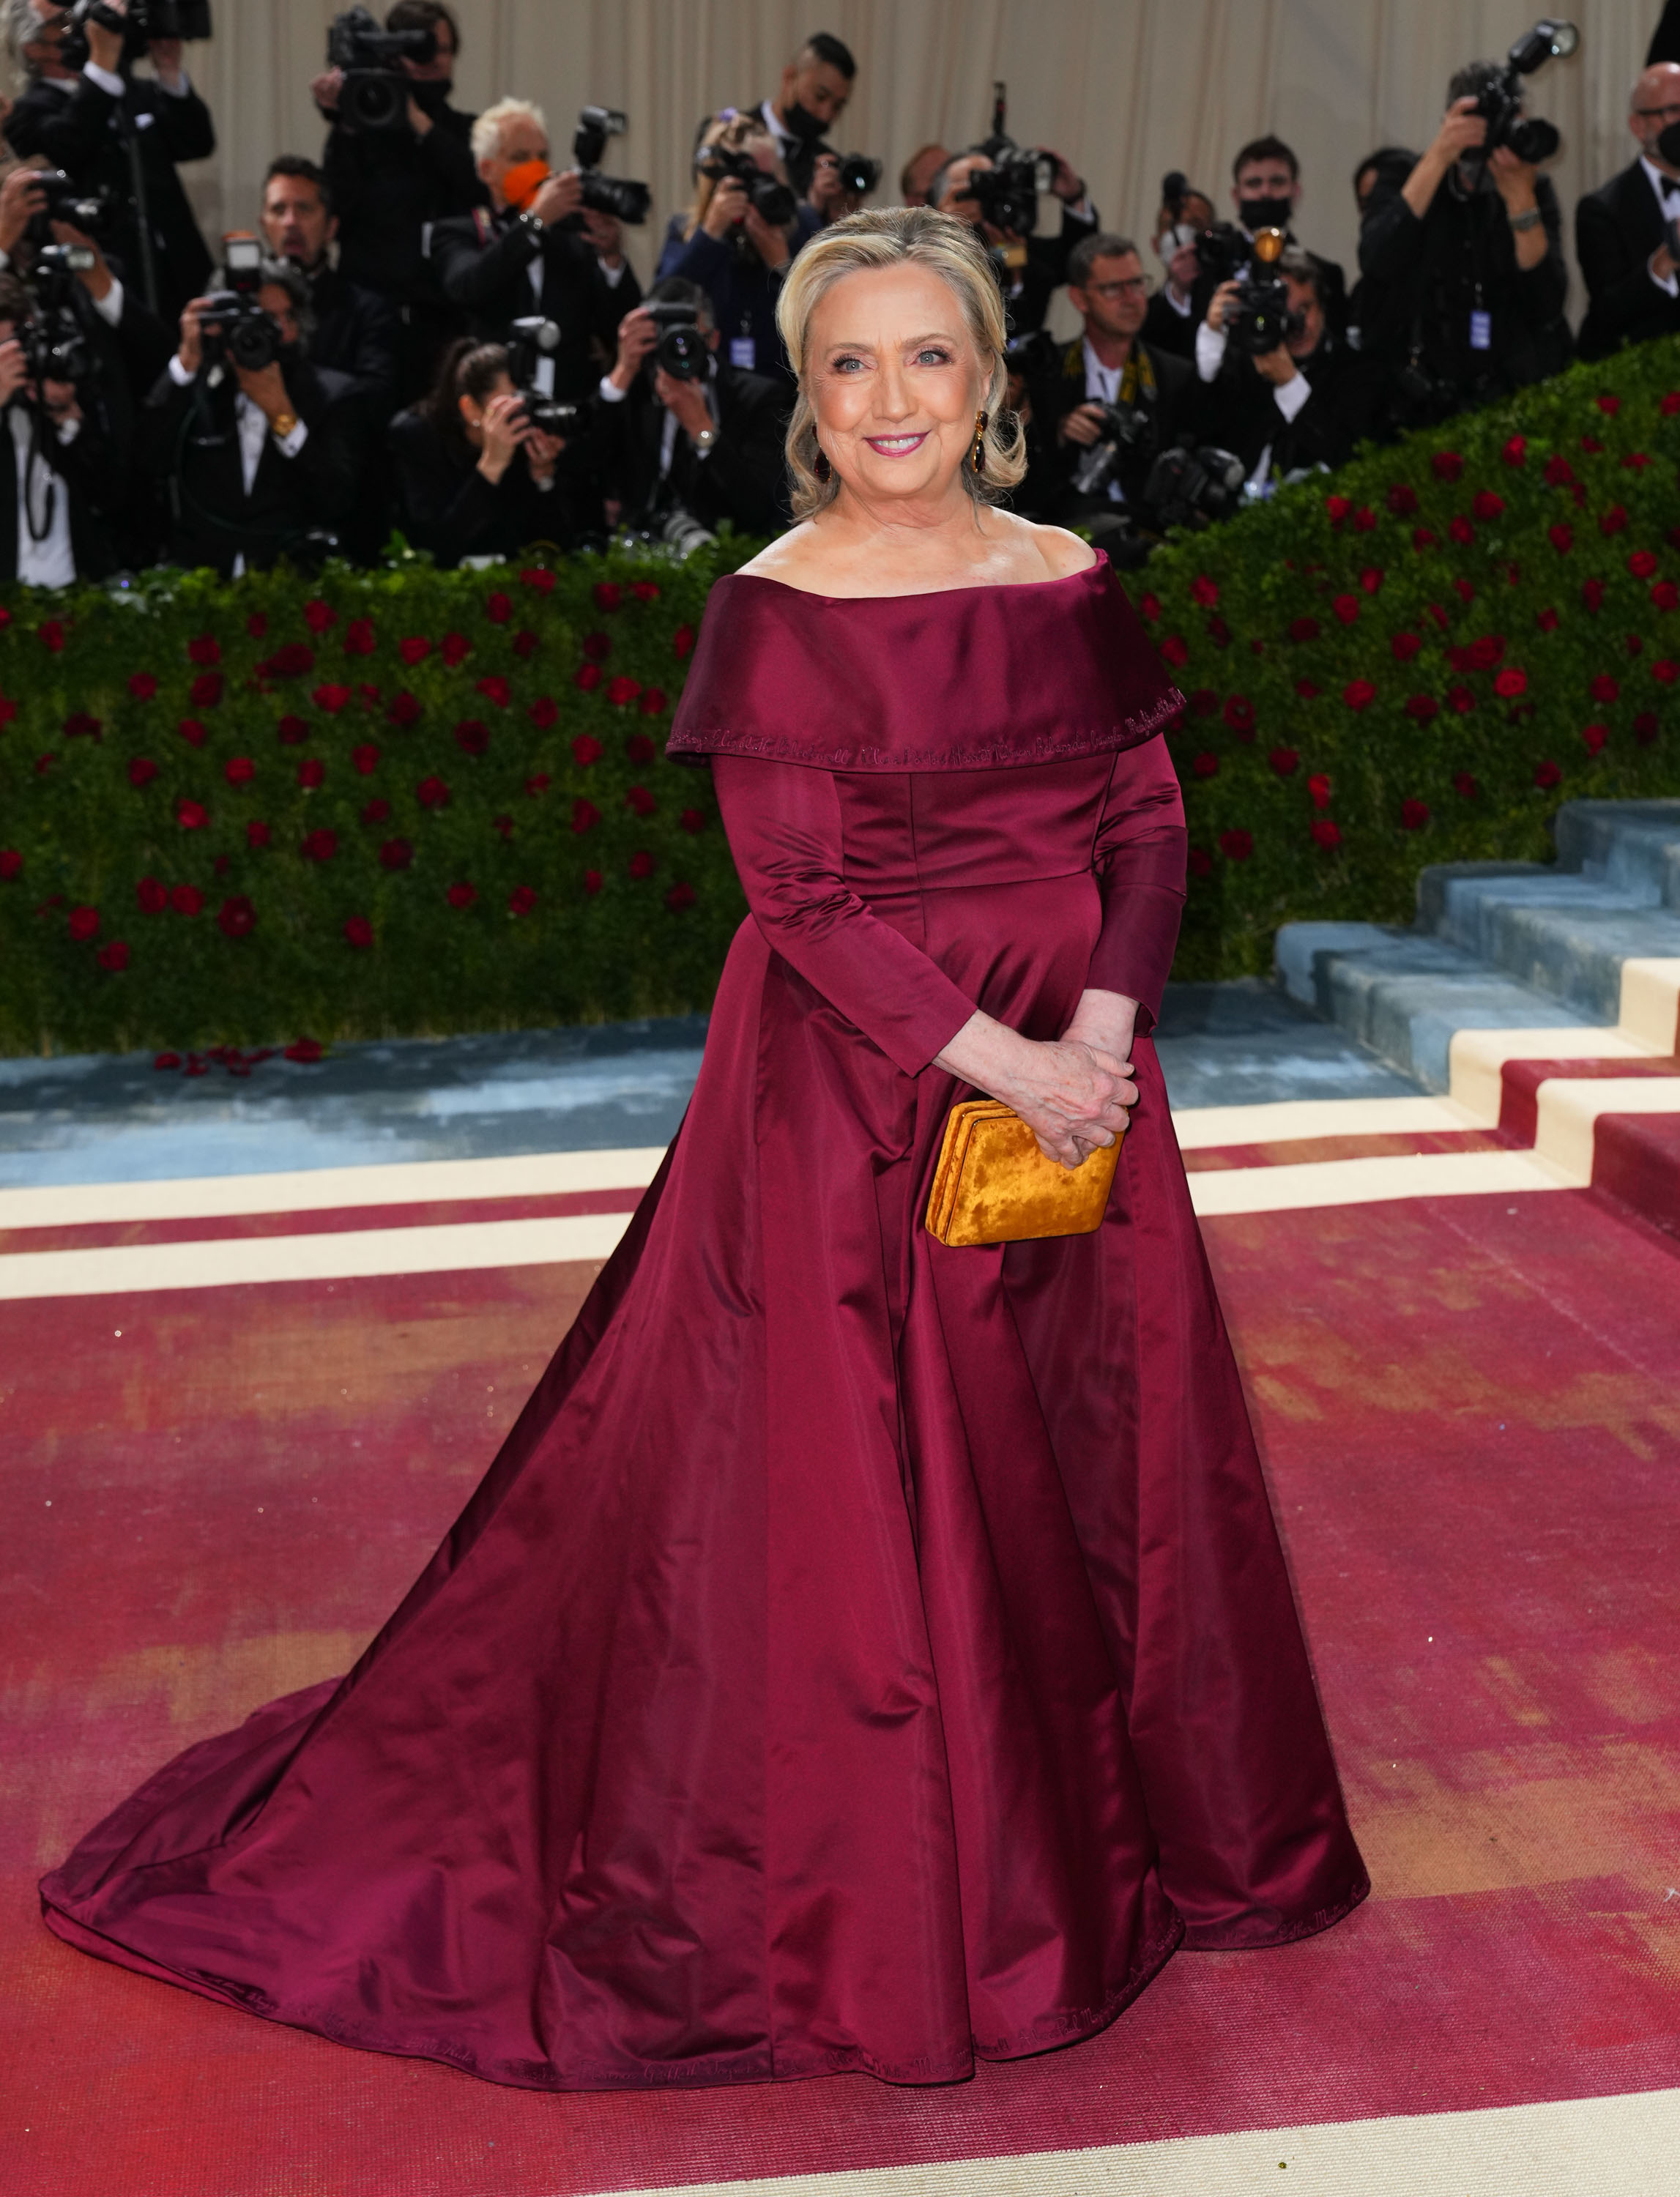 Celebrity in an off-shoulder burgundy gown with photographers in the background